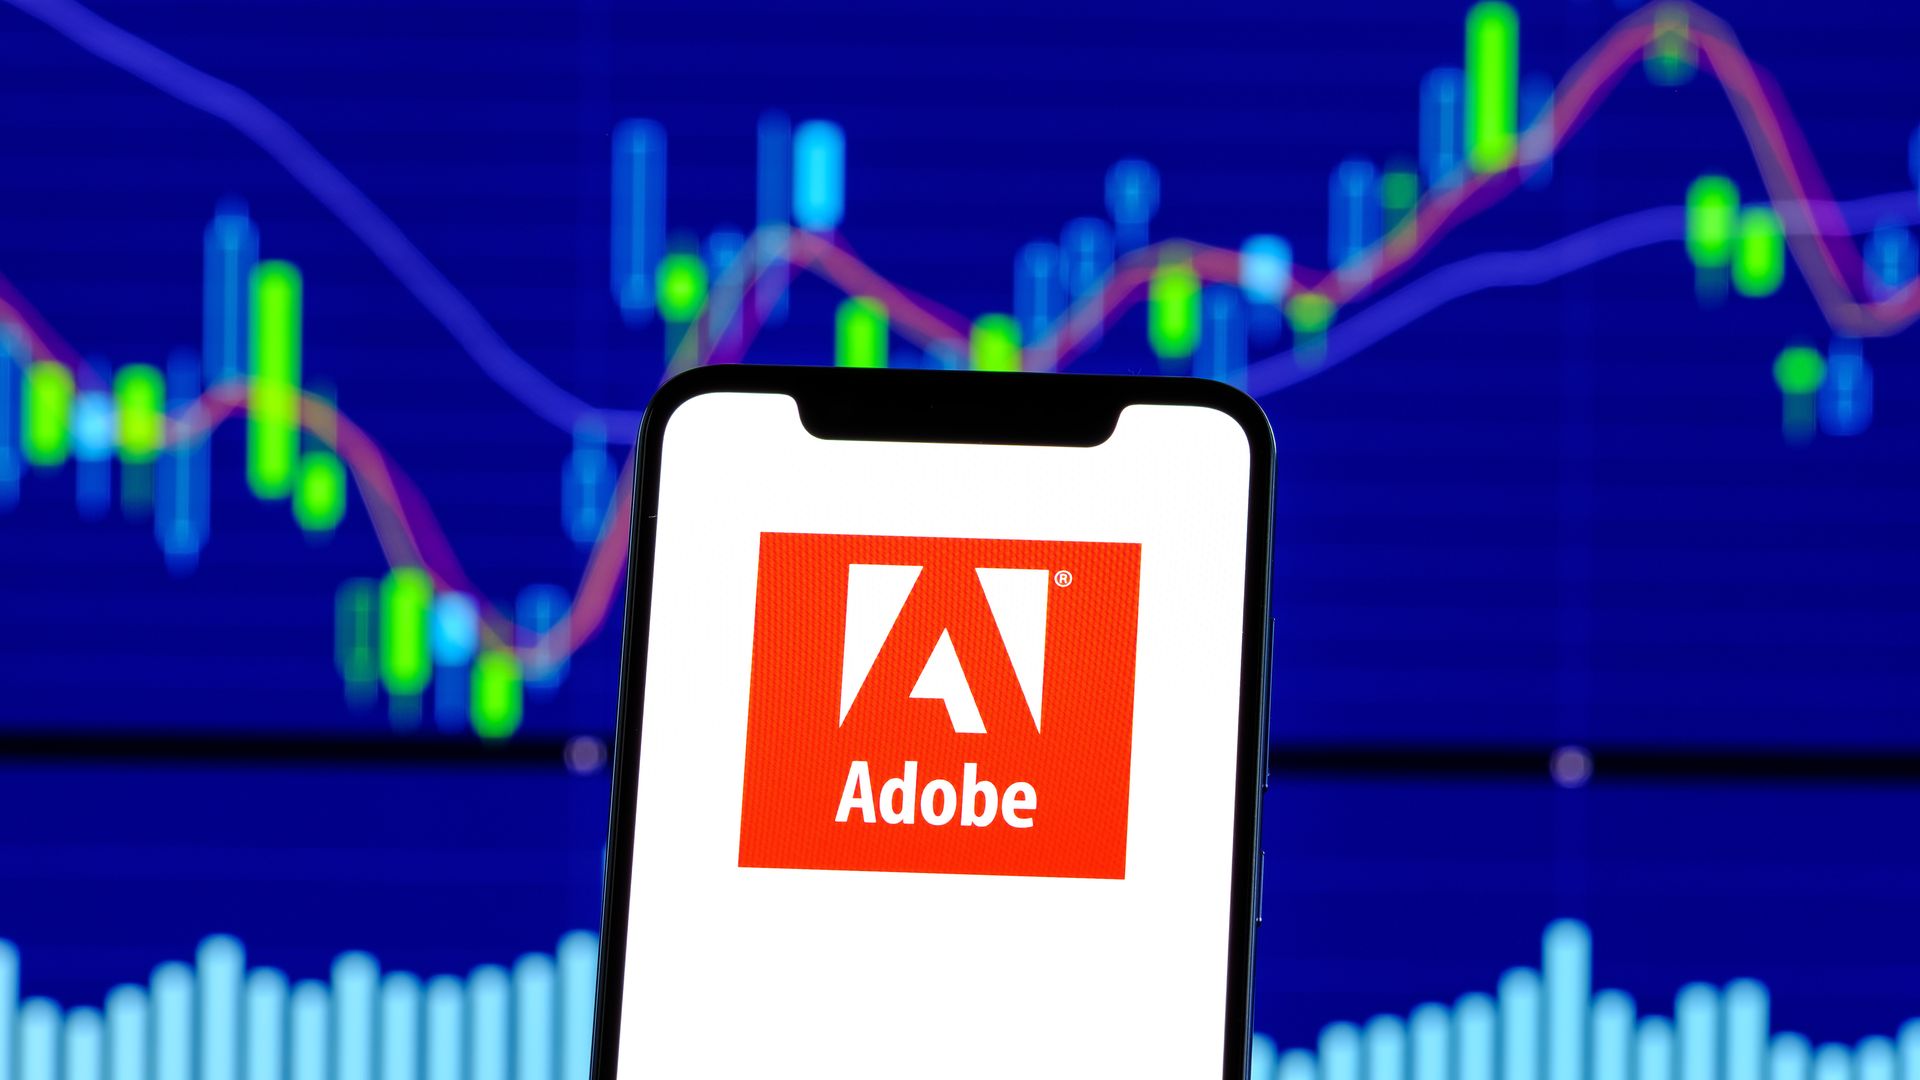 In this image, an Android phone with the Adobe logo is seen with charts in the background.